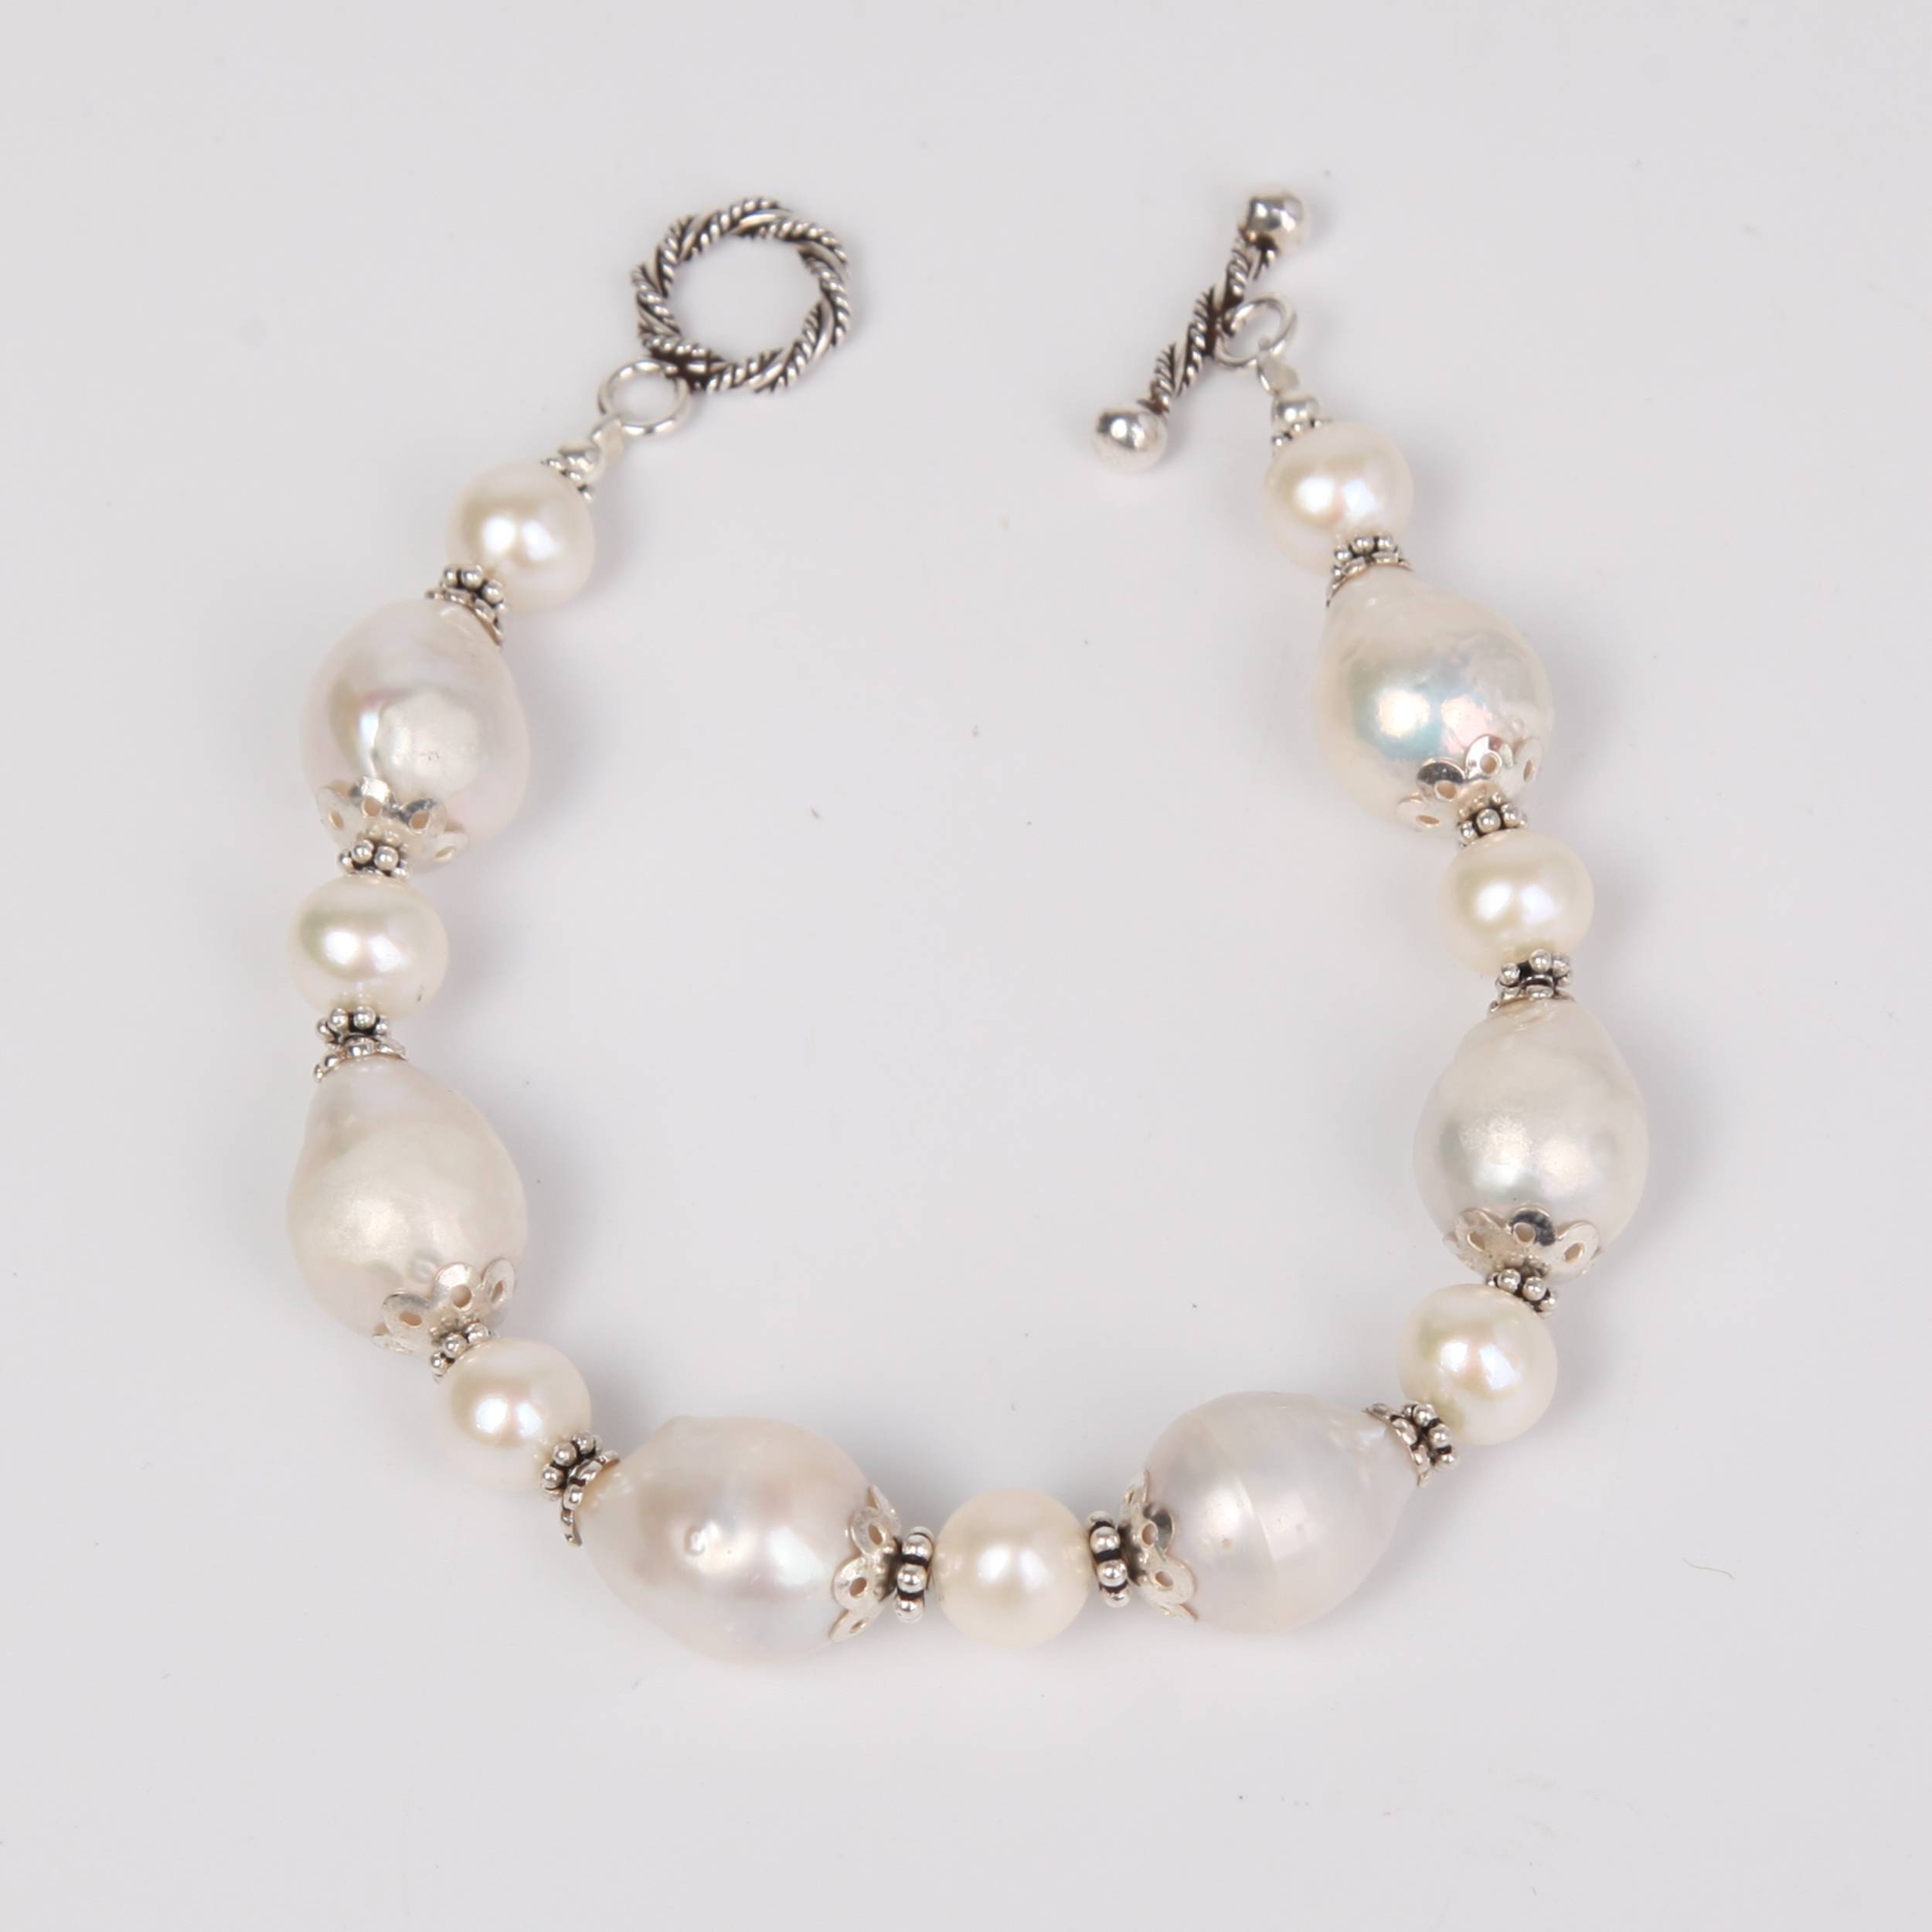 Detailed Fresh Water Pearls Bracelet with Sterling Silver